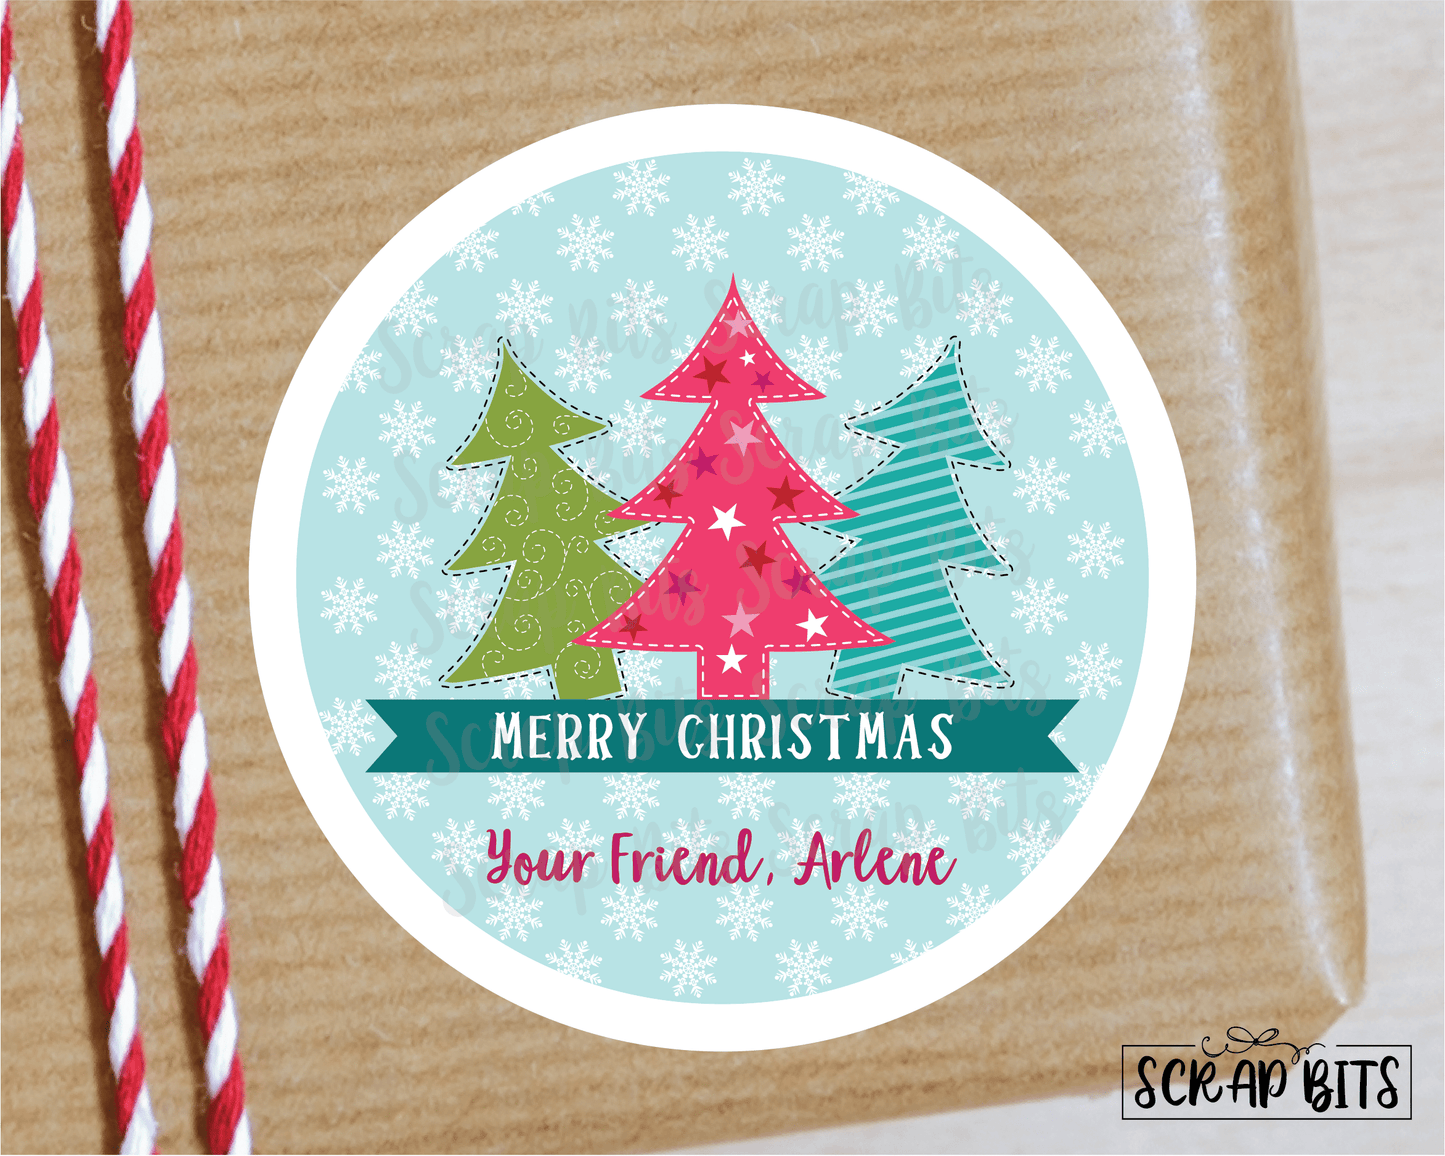 3 Christmas Trees Stickers or Tags . Christmas Gift Labels - Scrap Bits